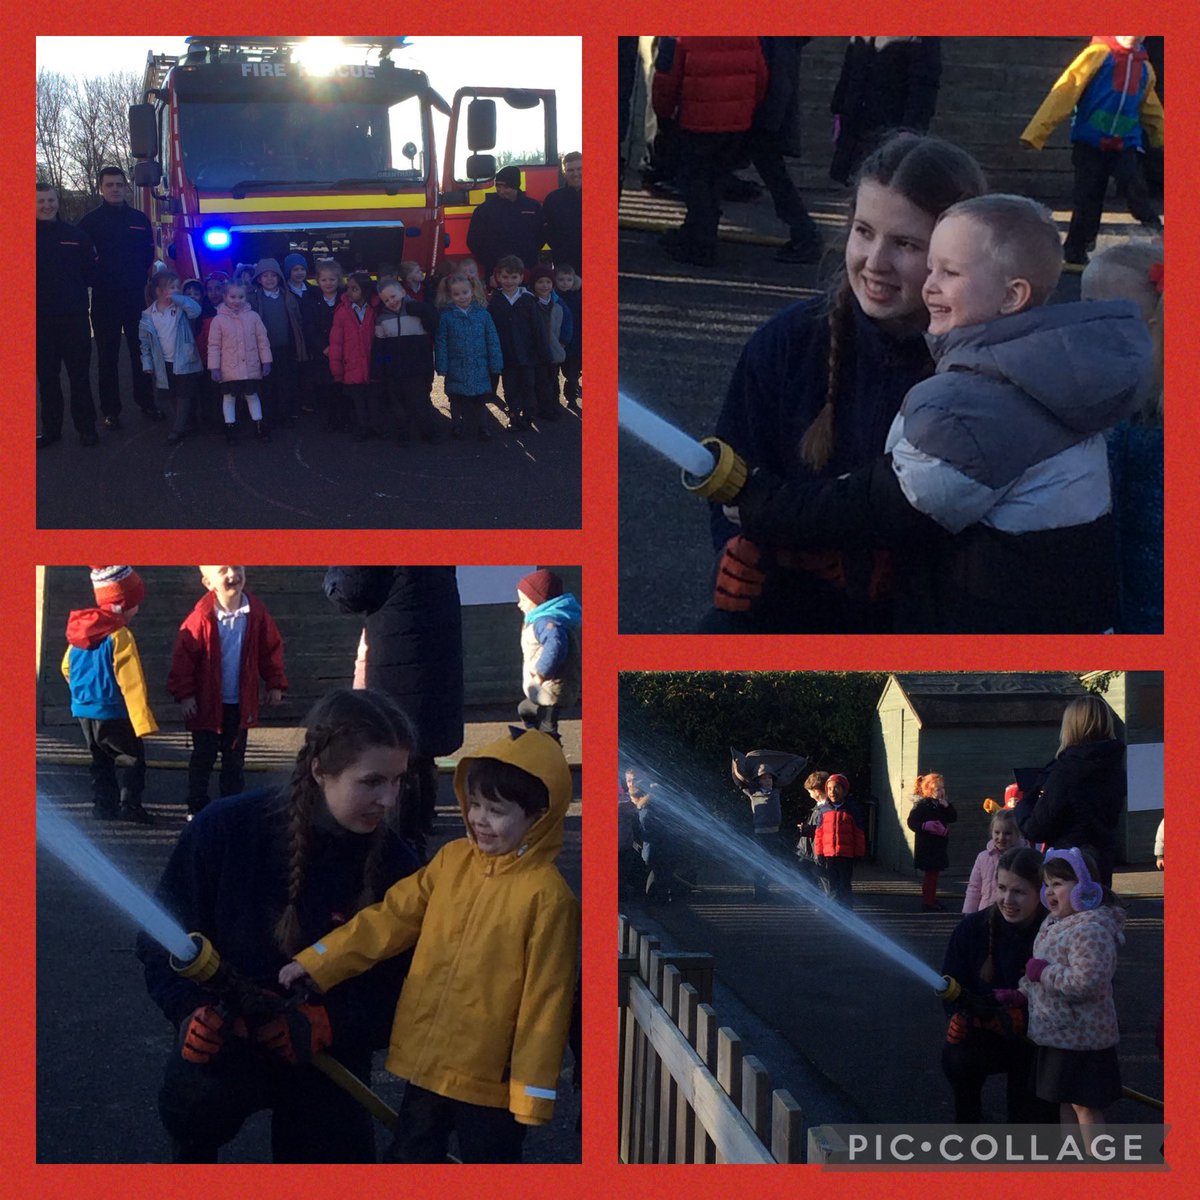 Superhero adventures at school! Our young heroes had a thrilling visit from real-life superheroes – the firefighters! 🚒💦 Excitement soared as they got to handle the hose and learn about fire fighters Learning meets action! 💪🔥 #SuperheroSchool @Little_Gonerby @InfinityAcad